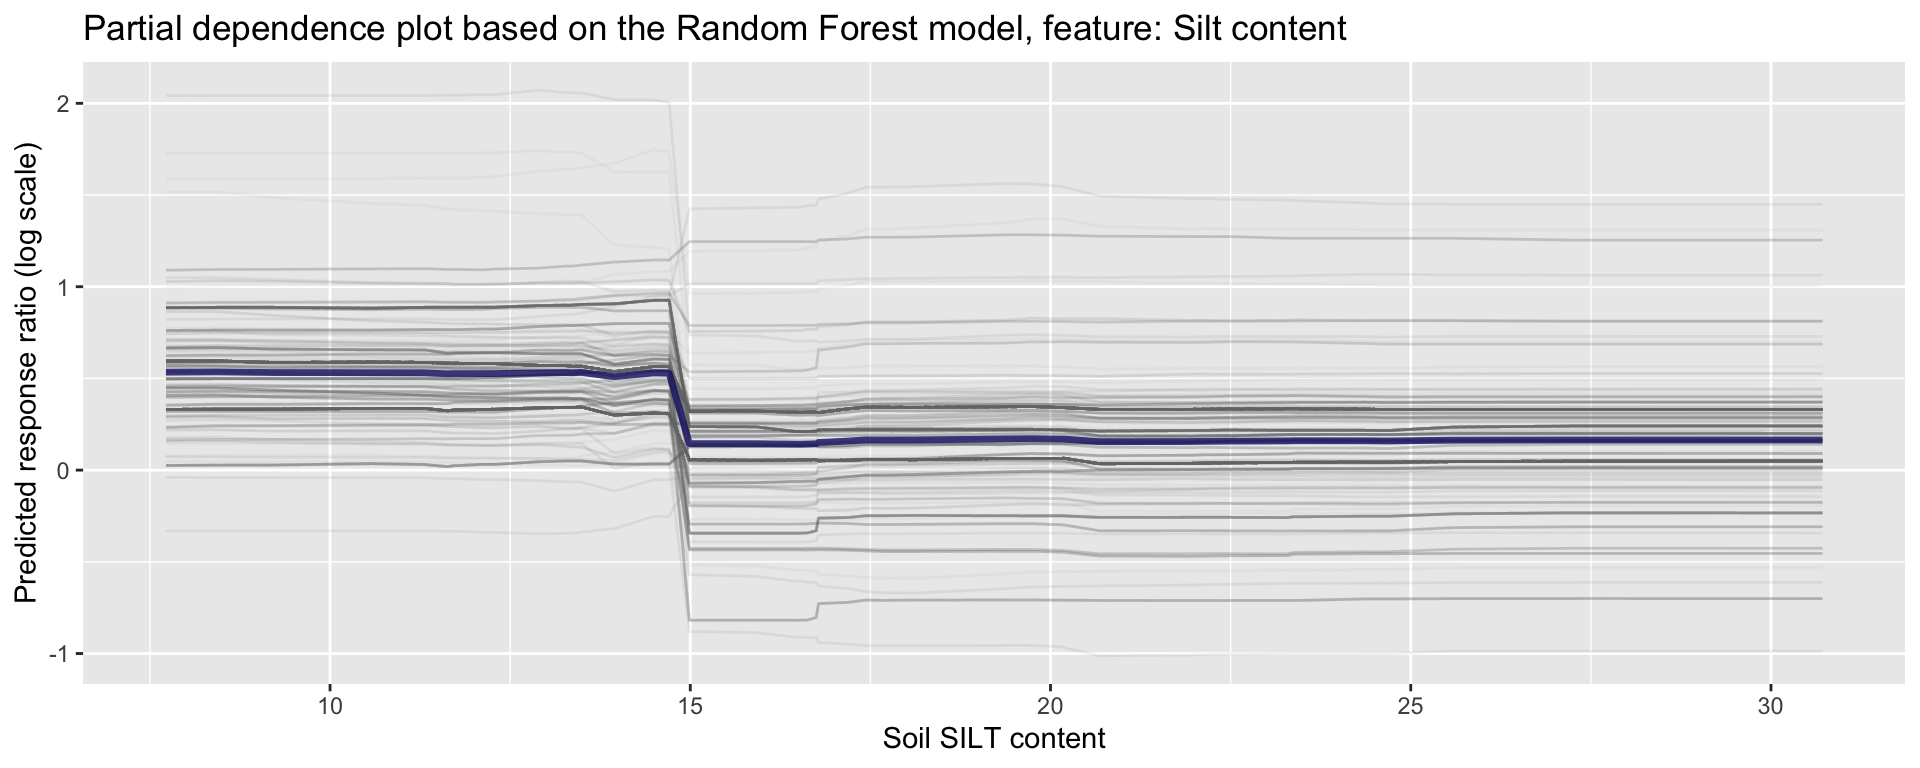 Partial dependence plot for silt content